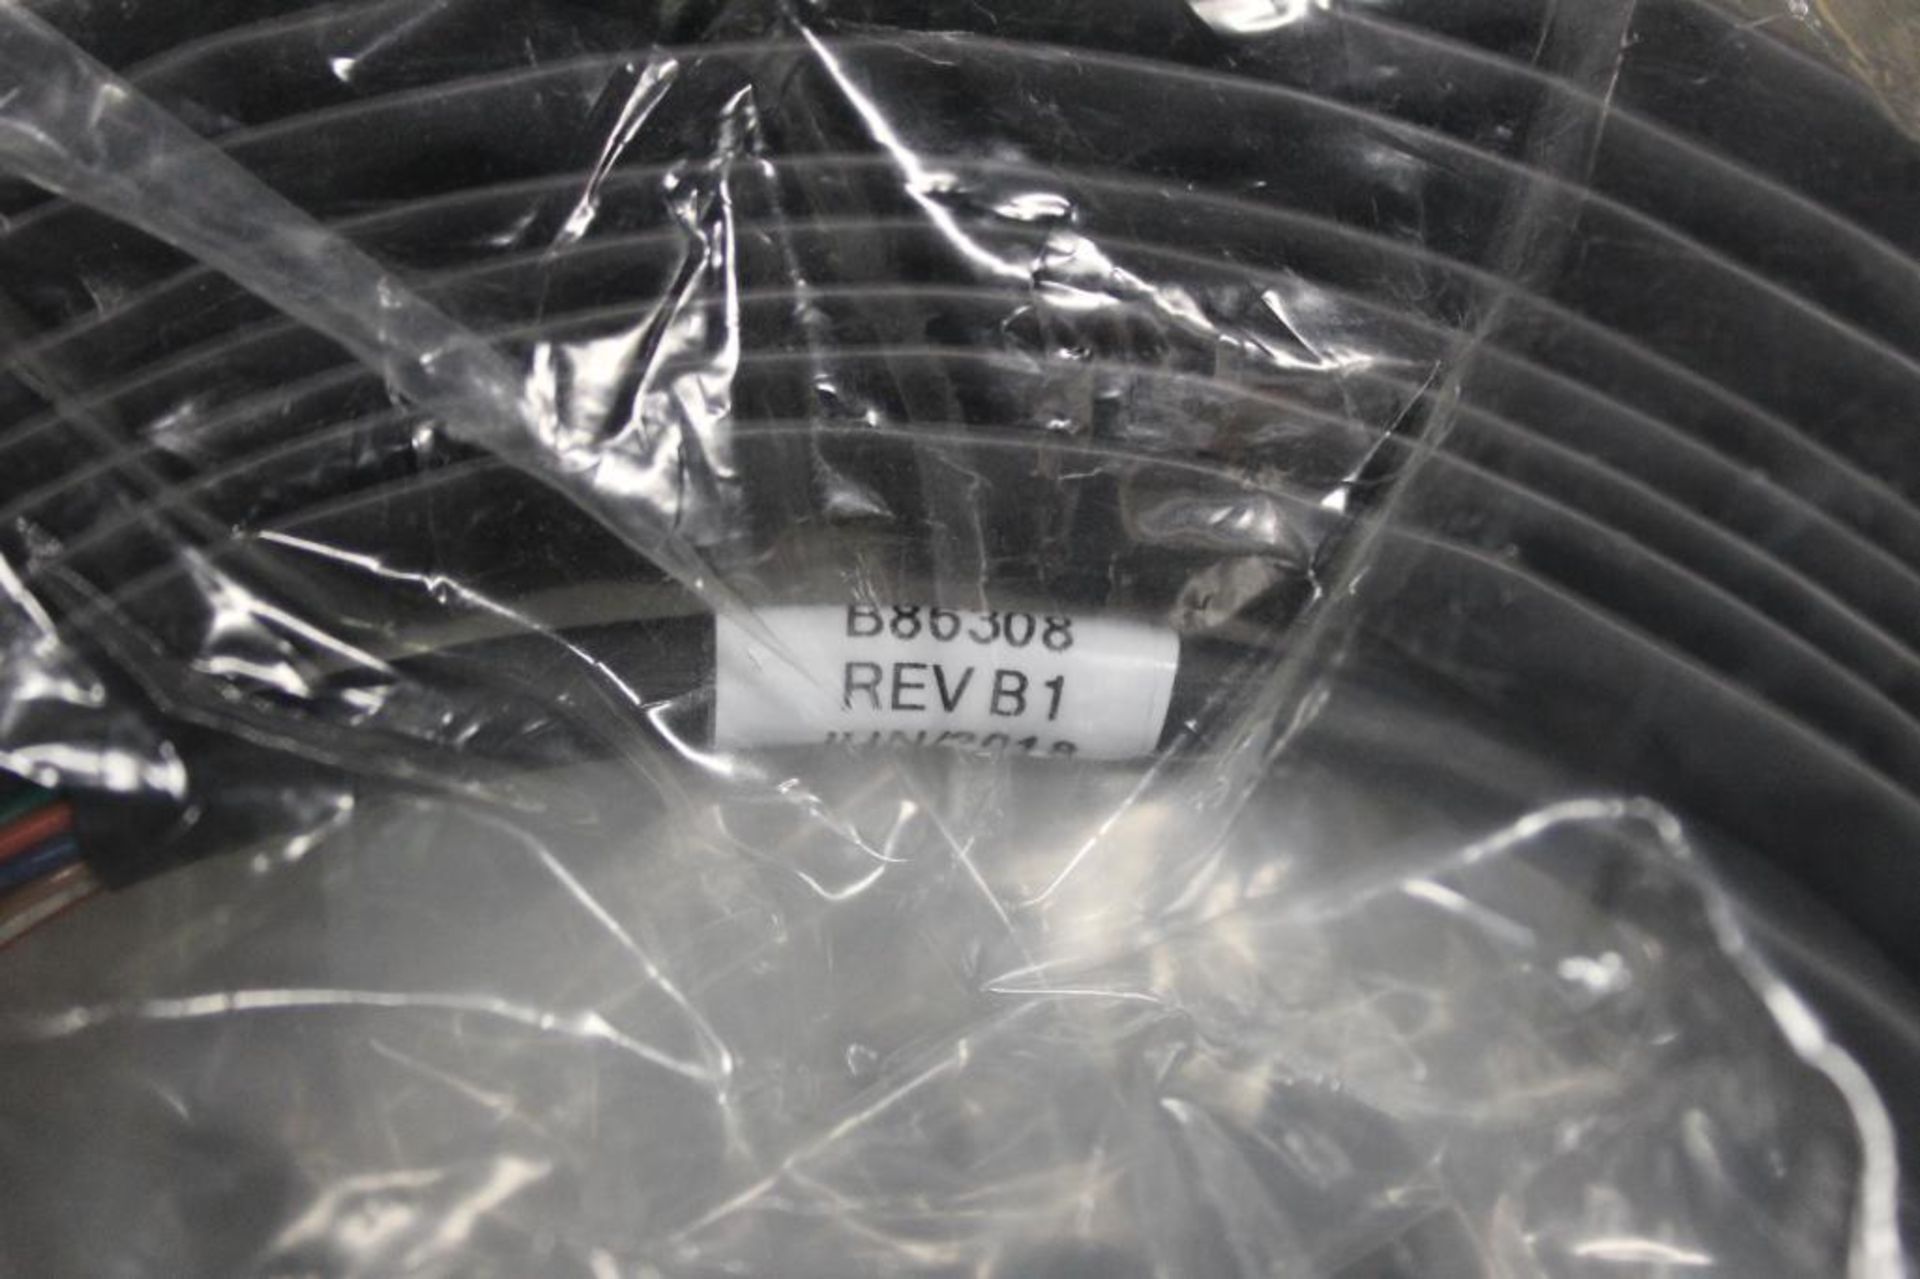 Lot of Wire Harnesses B86308 REV B1 - Image 5 of 7